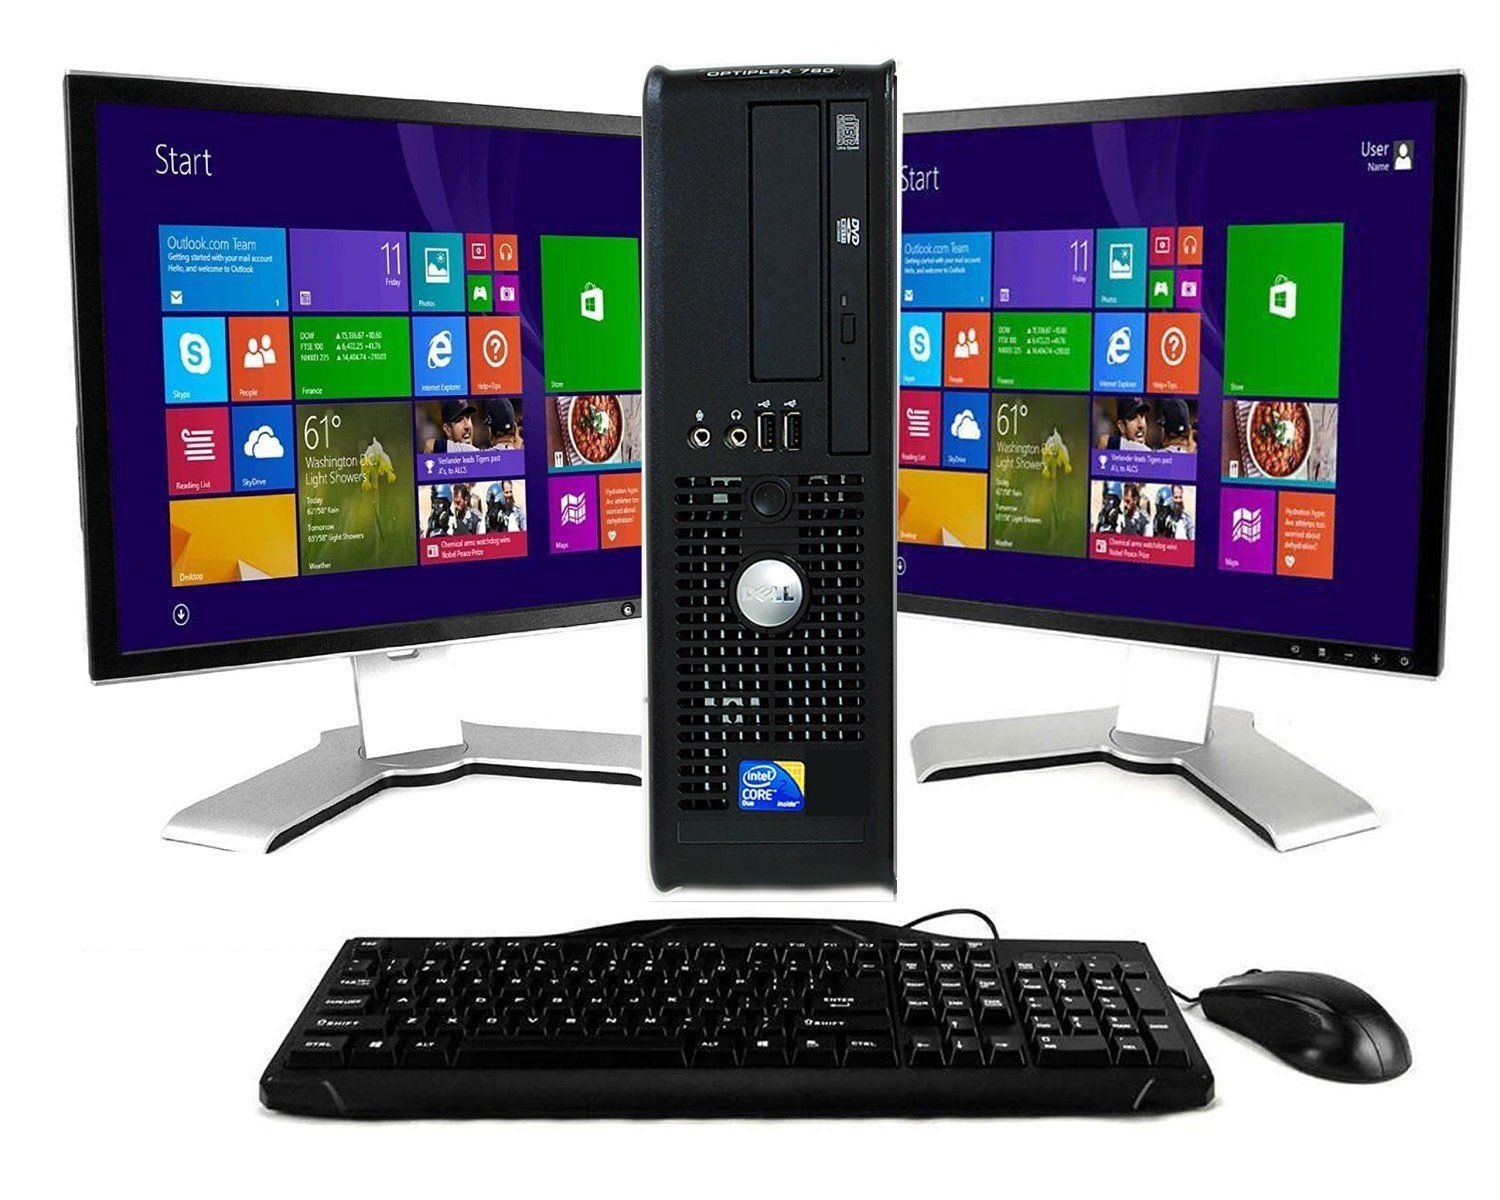 Dell desktop tower PC with dual monitors